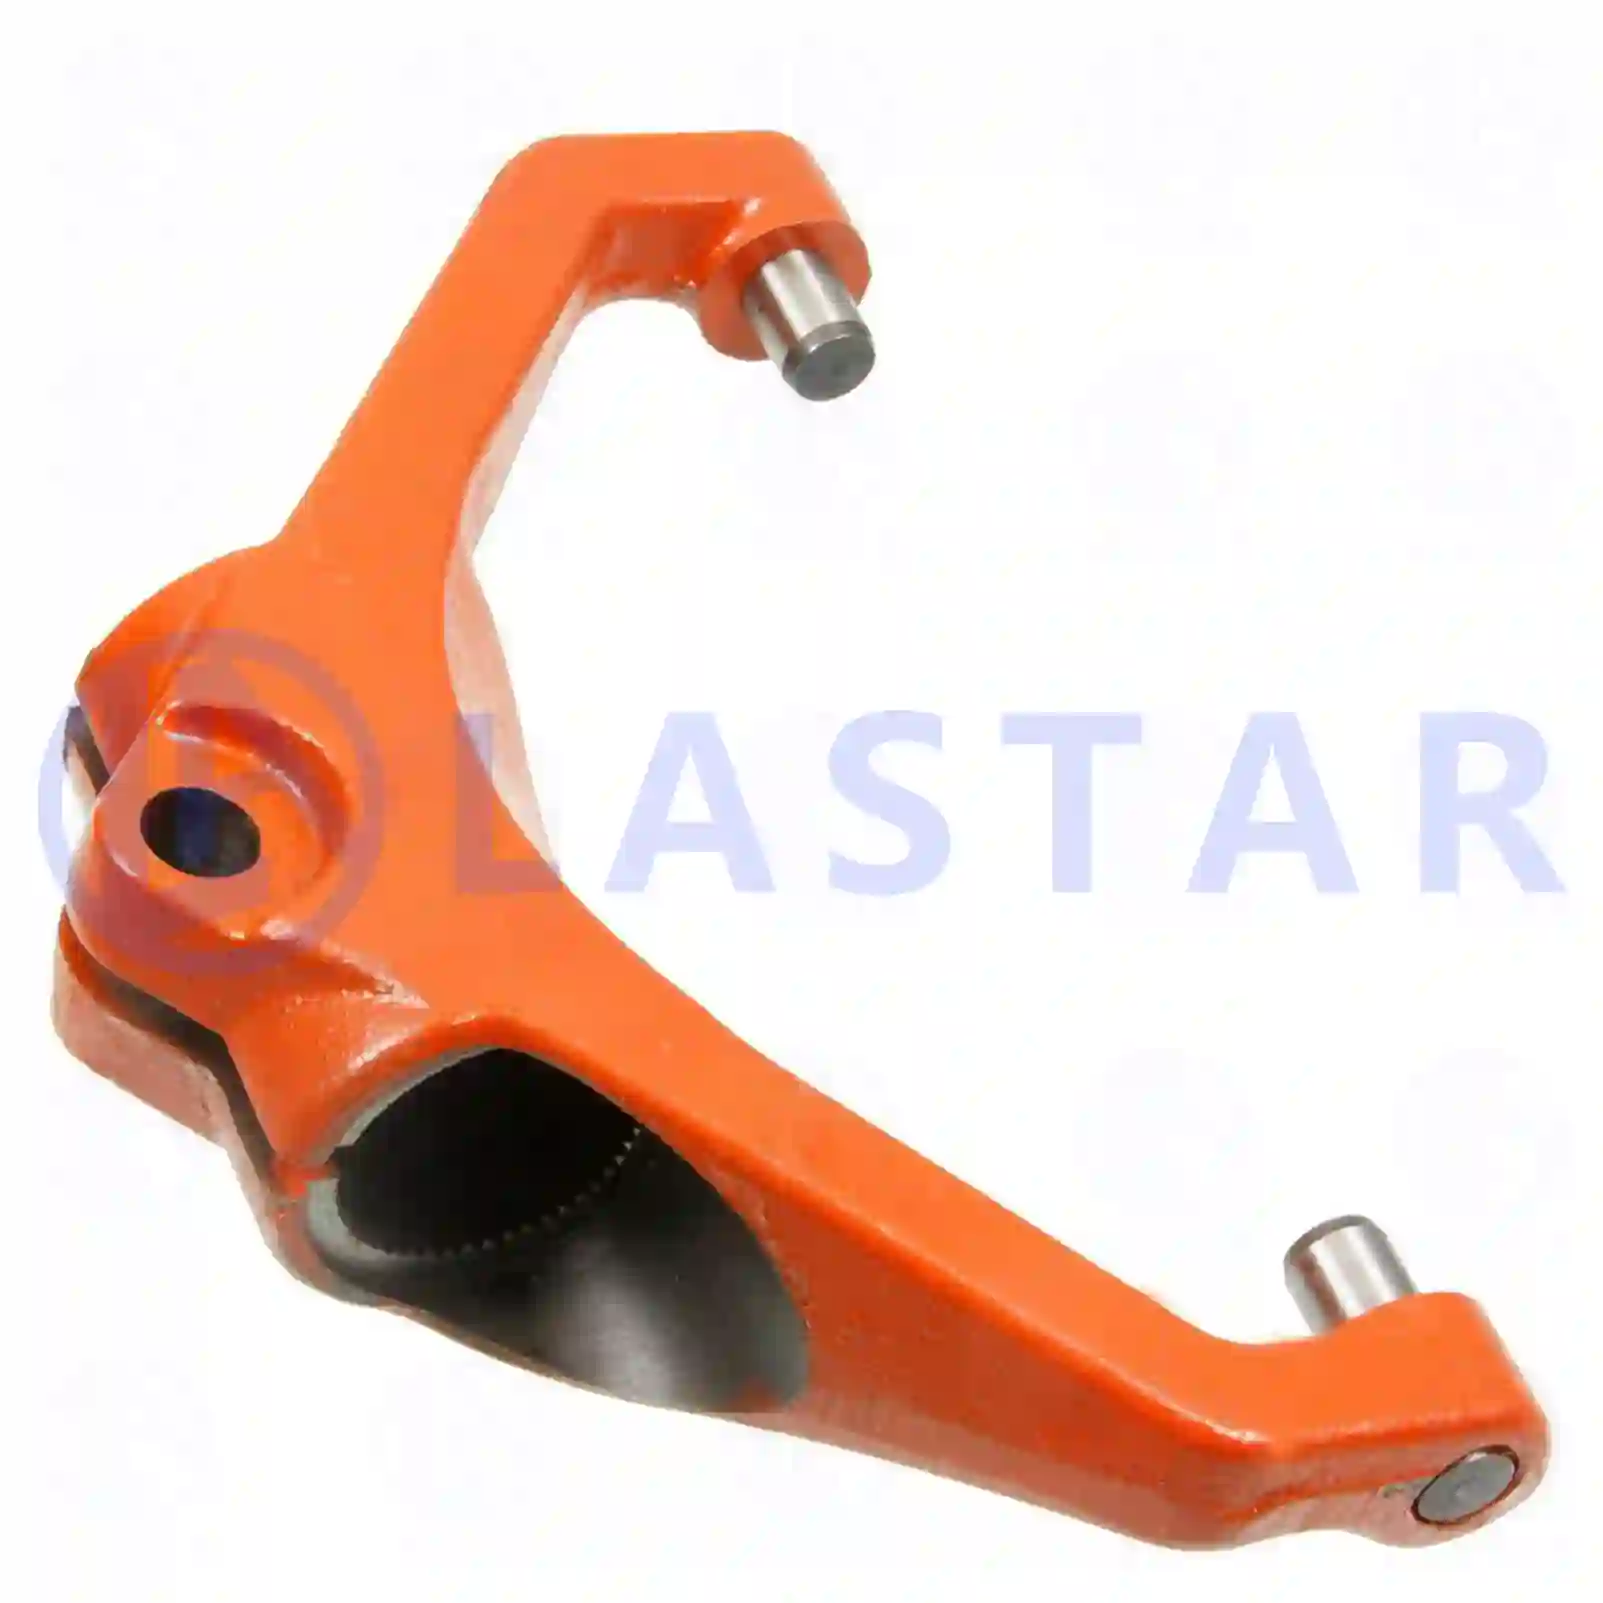 Release fork, with rolls, 77722295, 1667058S, ZG30364-0008 ||  77722295 Lastar Spare Part | Truck Spare Parts, Auotomotive Spare Parts Release fork, with rolls, 77722295, 1667058S, ZG30364-0008 ||  77722295 Lastar Spare Part | Truck Spare Parts, Auotomotive Spare Parts